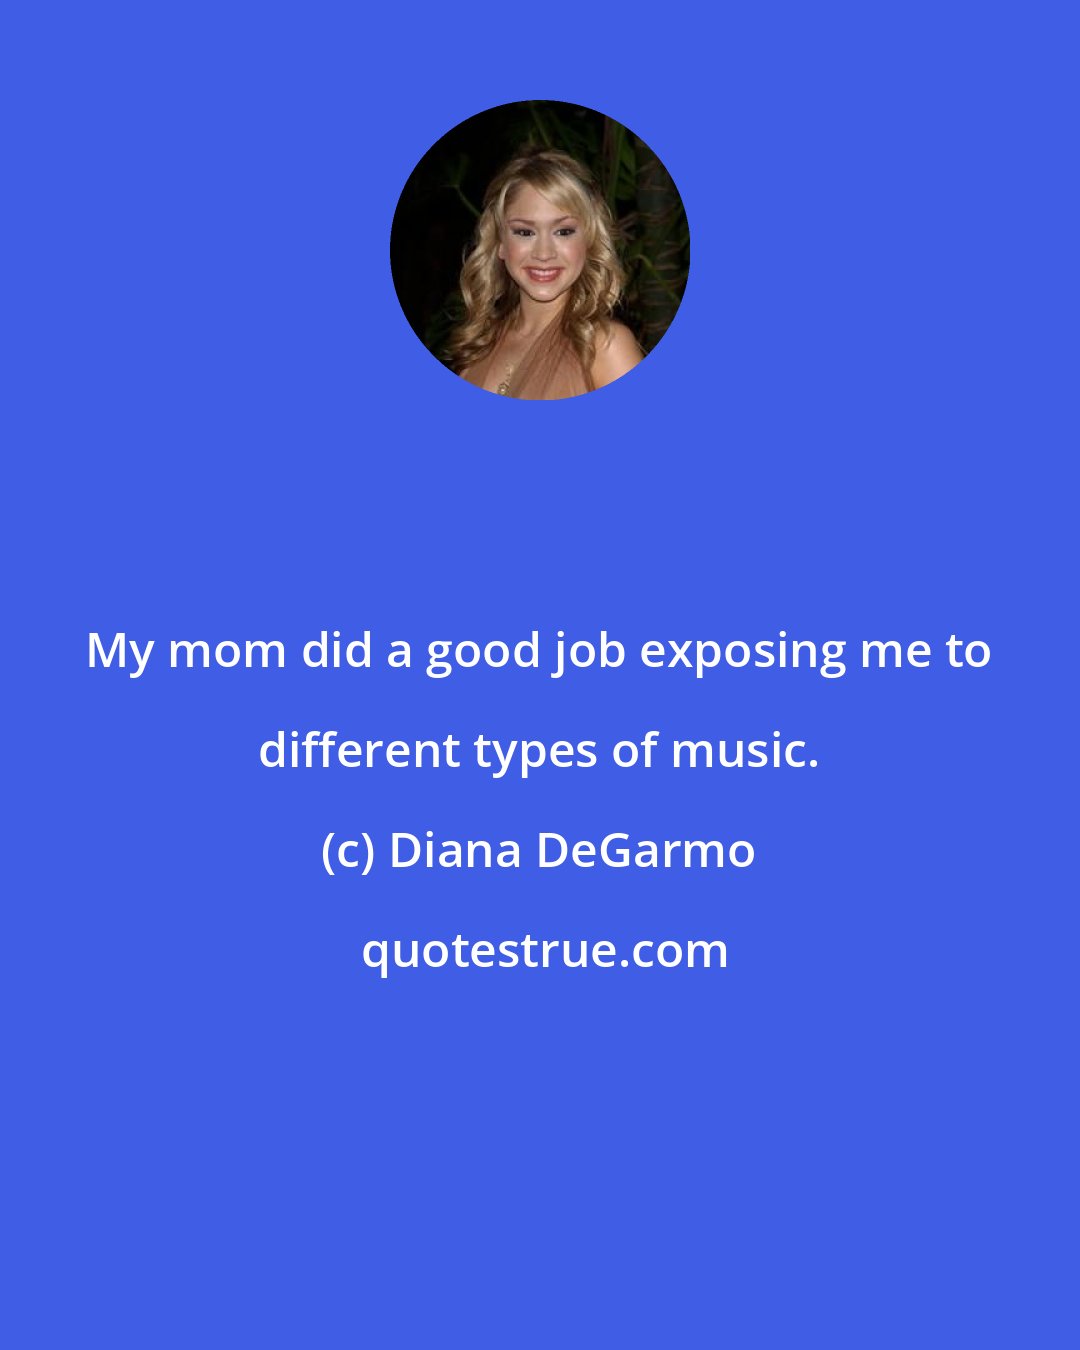 Diana DeGarmo: My mom did a good job exposing me to different types of music.